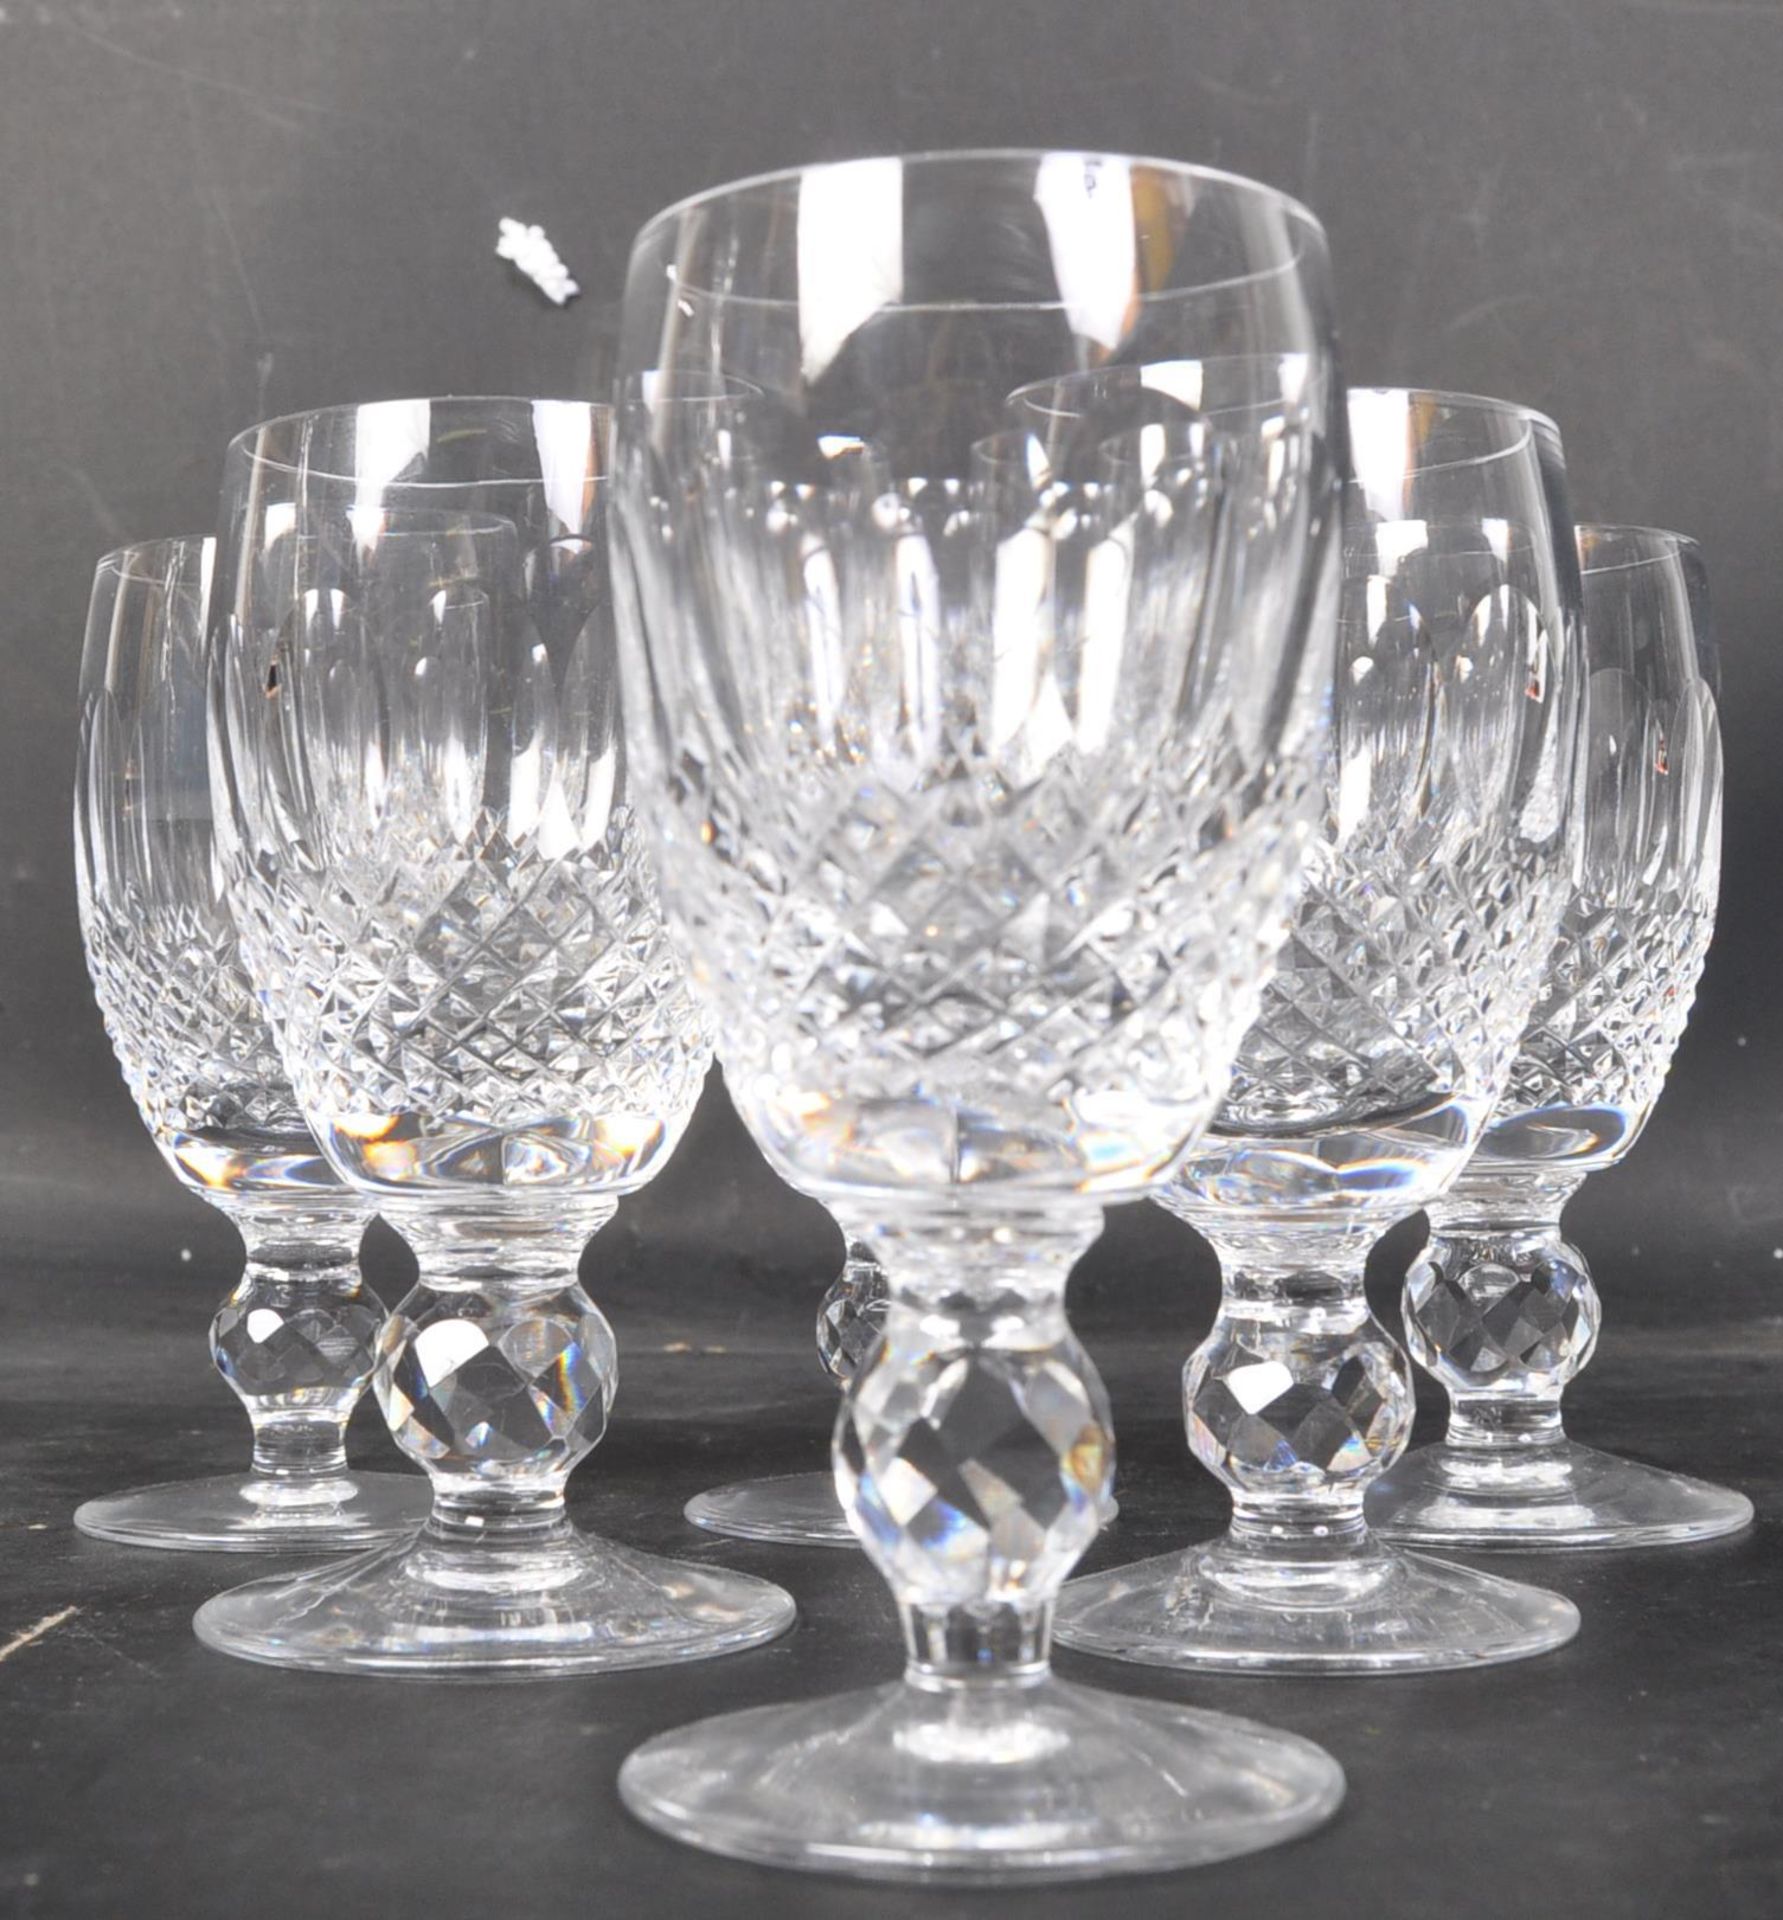 SIX VINTAGE WATERFORD CRYSTAL SHERRY GLASSES & DECANTER - Image 3 of 5